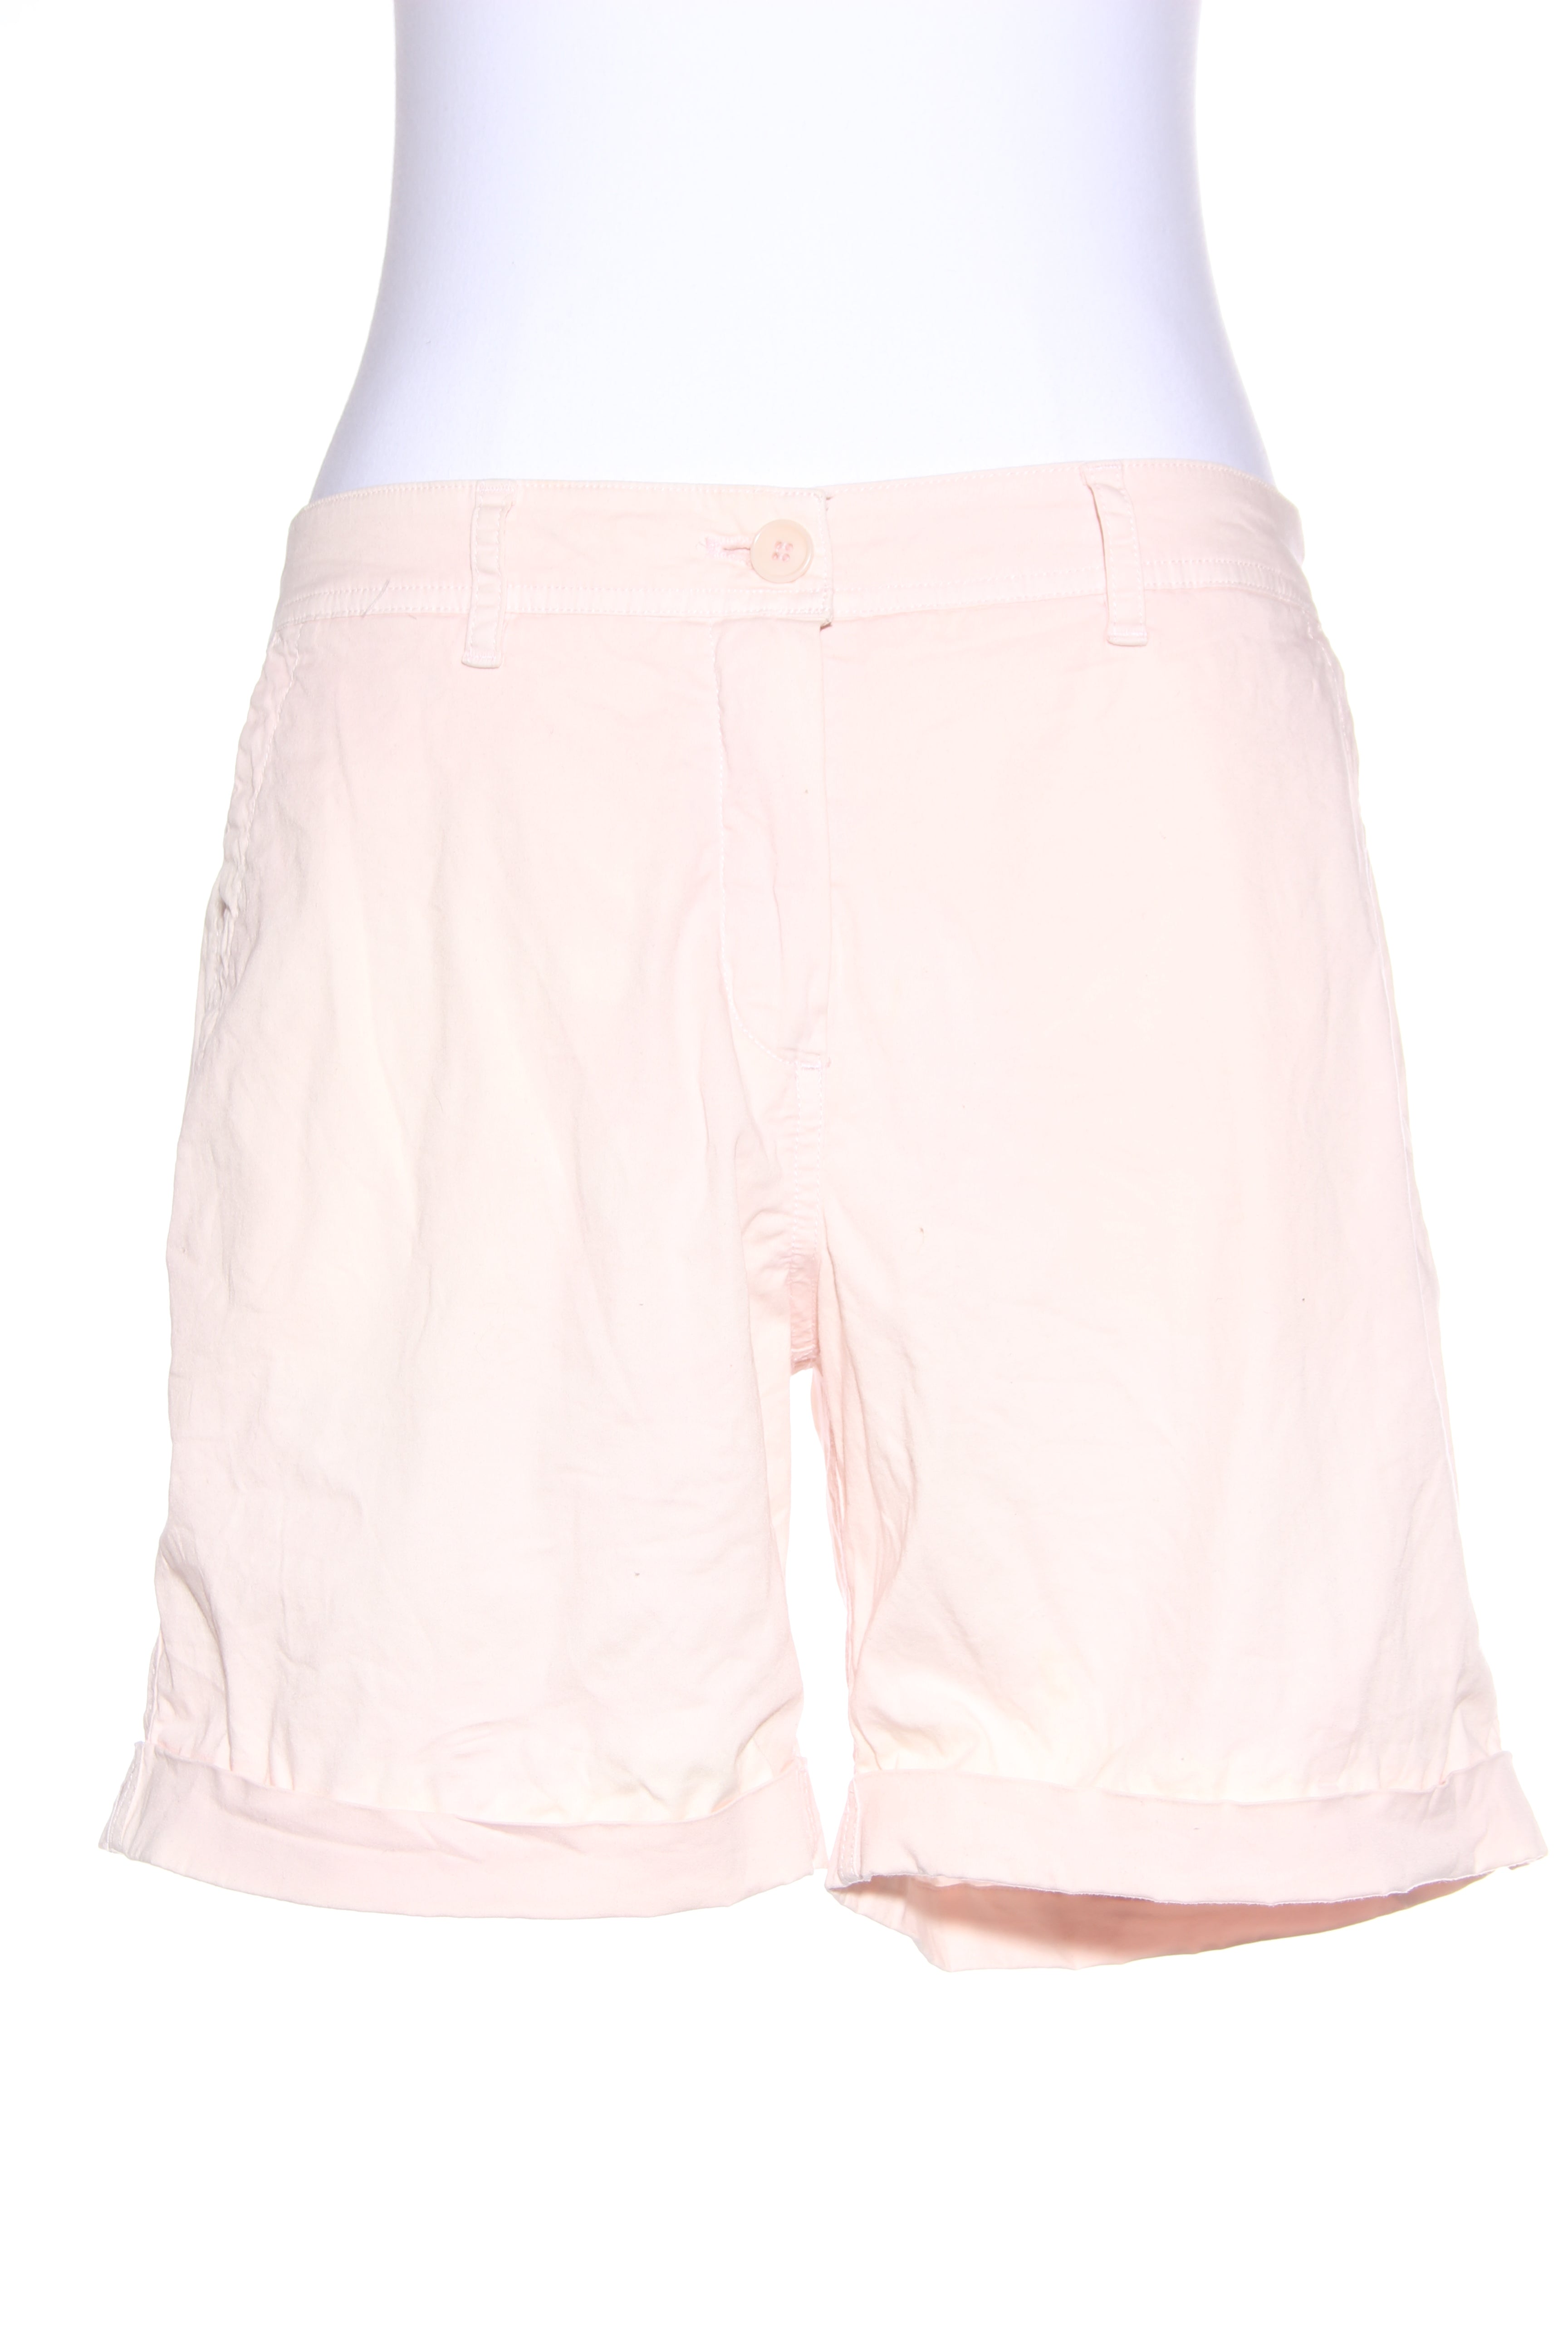 TRENERY - Peachy pink shorts! 12 | Recycle Style | Preloved Designer ...